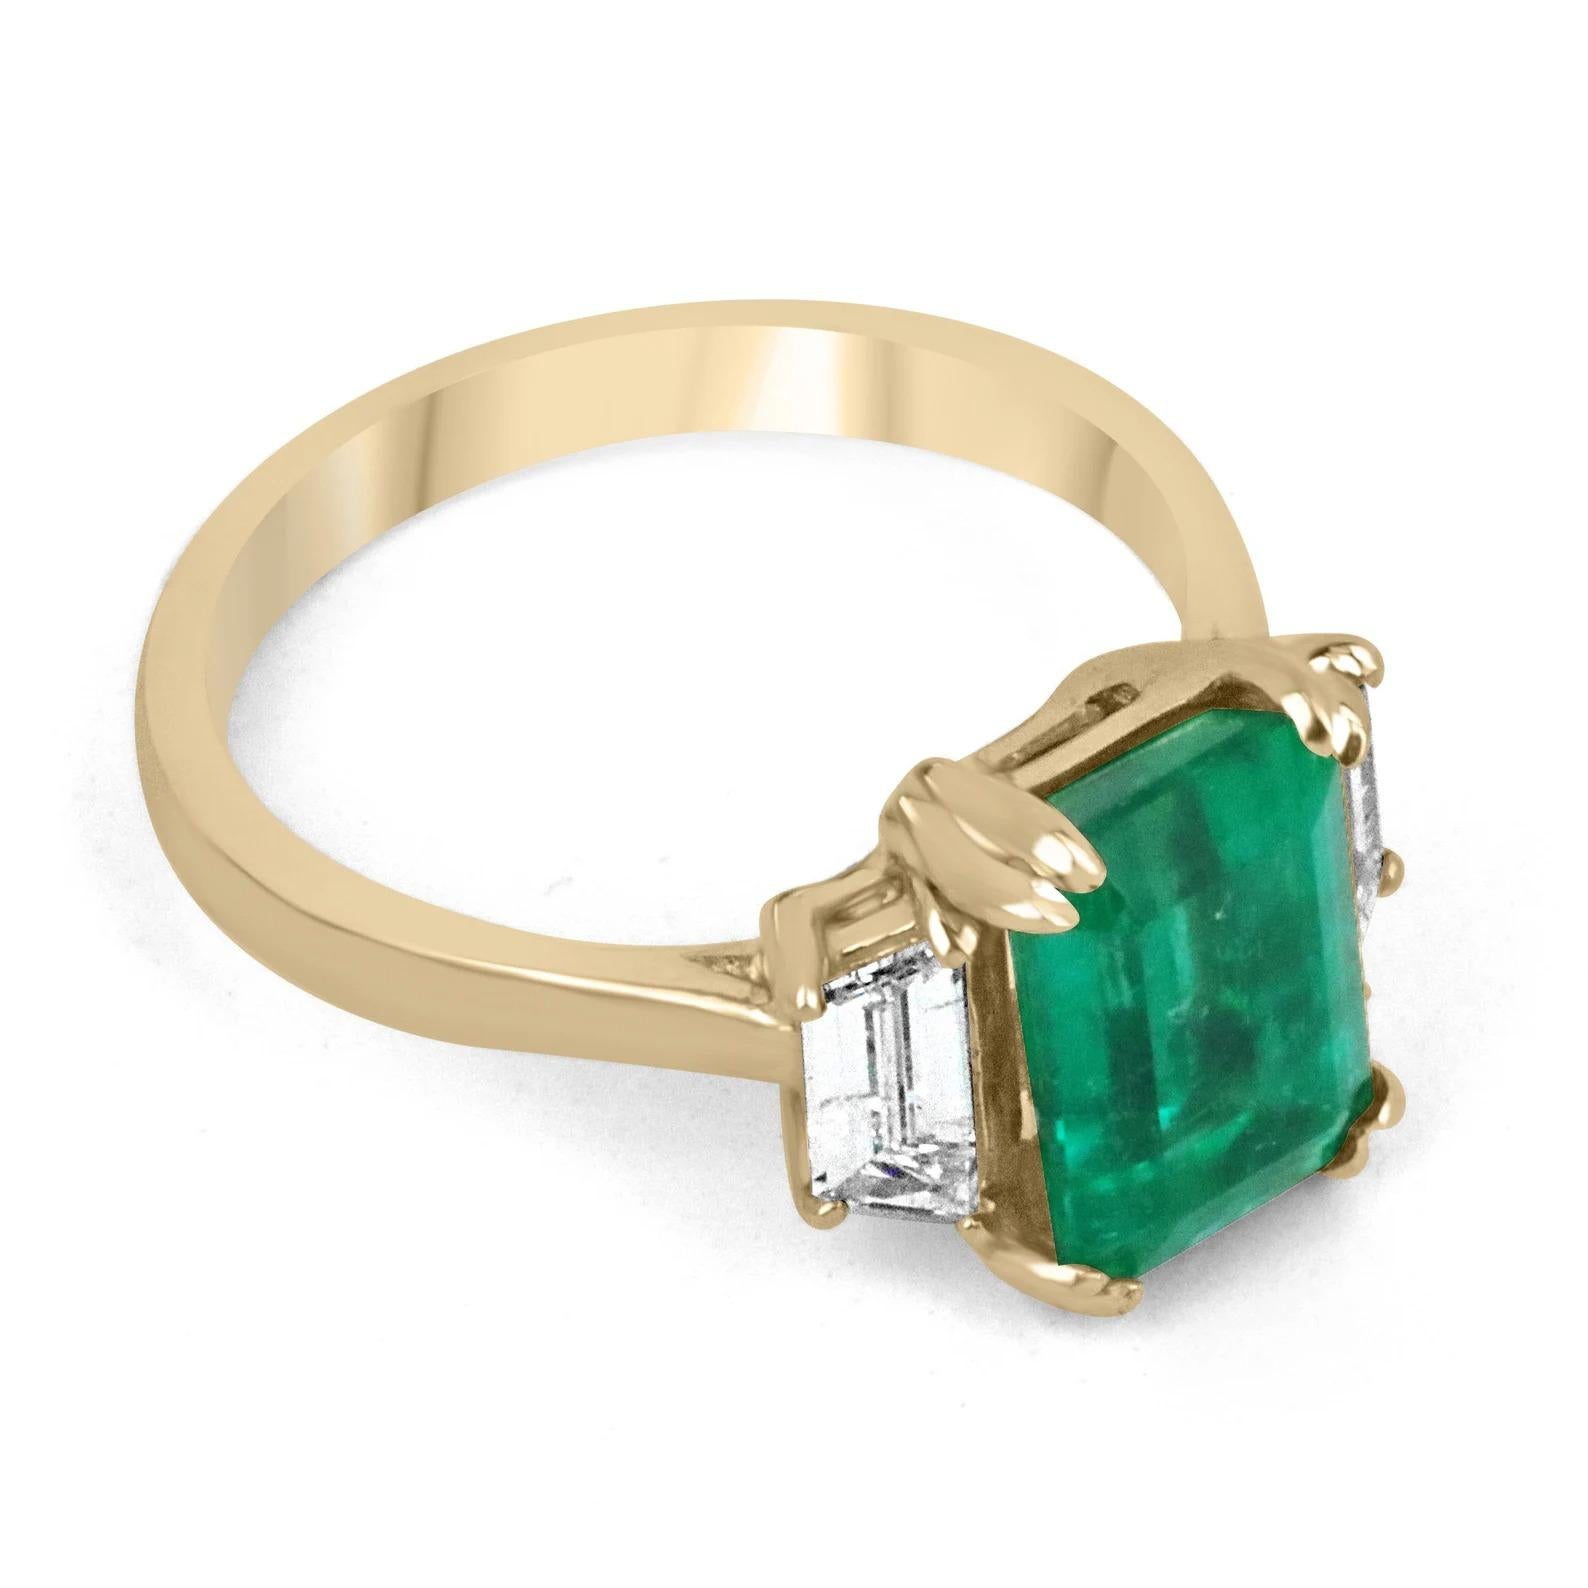 A classic AAA top-grade Colombian emerald and trapezoid diamond engagement, statement, or right-hand ring. Dexterously hand-crafted in gleaming 18K gold this ring features a natural rare Colombian emerald-emerald cut from the famous Muzo mines. Set